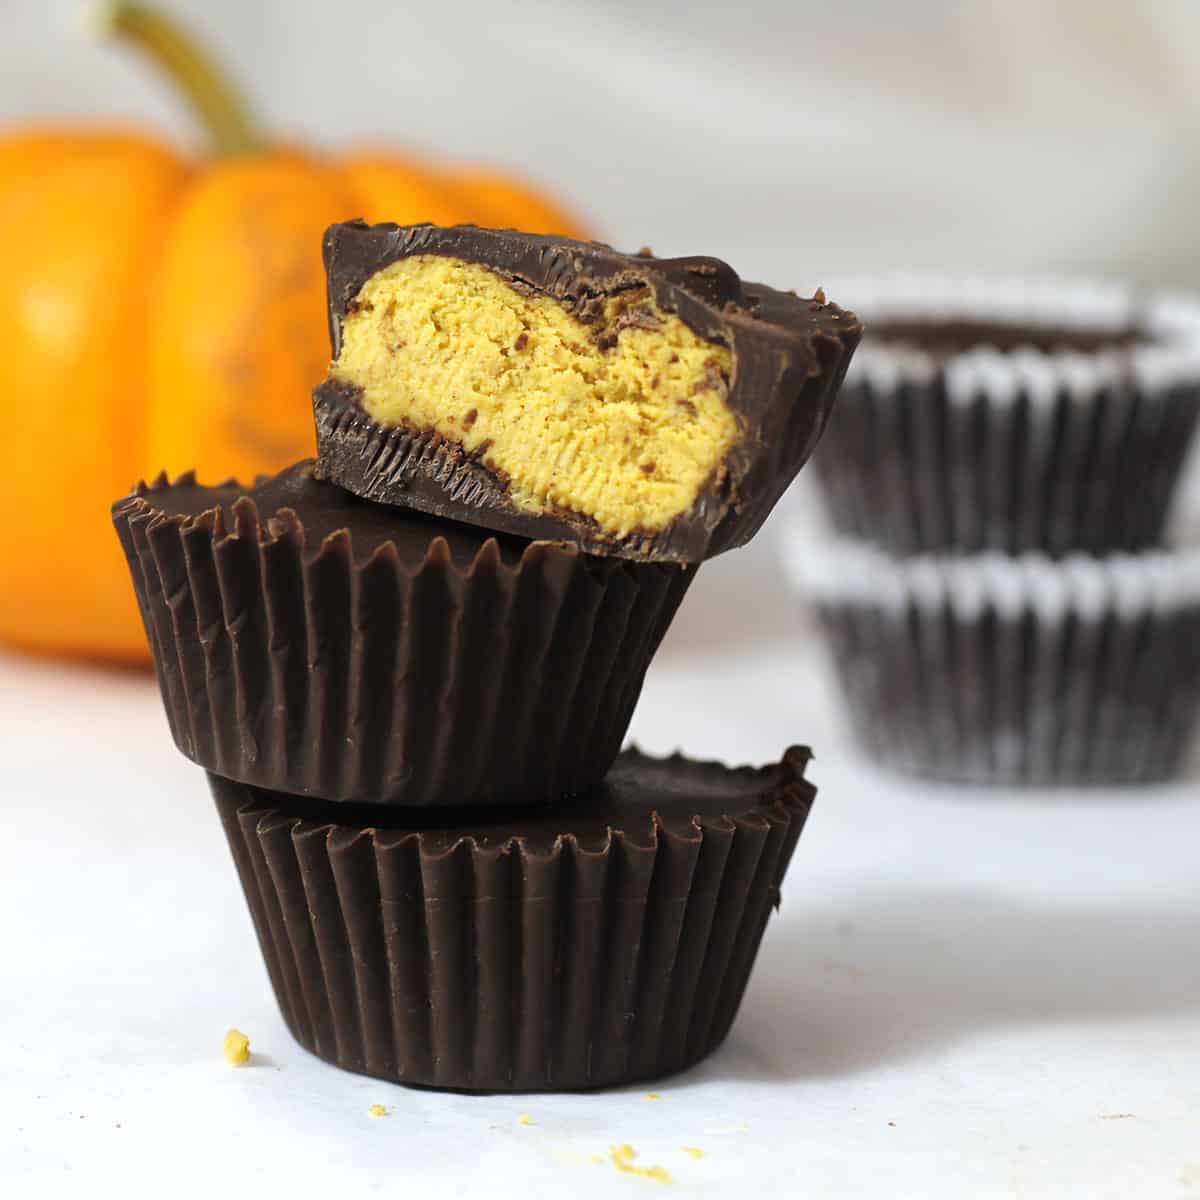 cups of pumpkin fudge coated in chocolate in a tower.